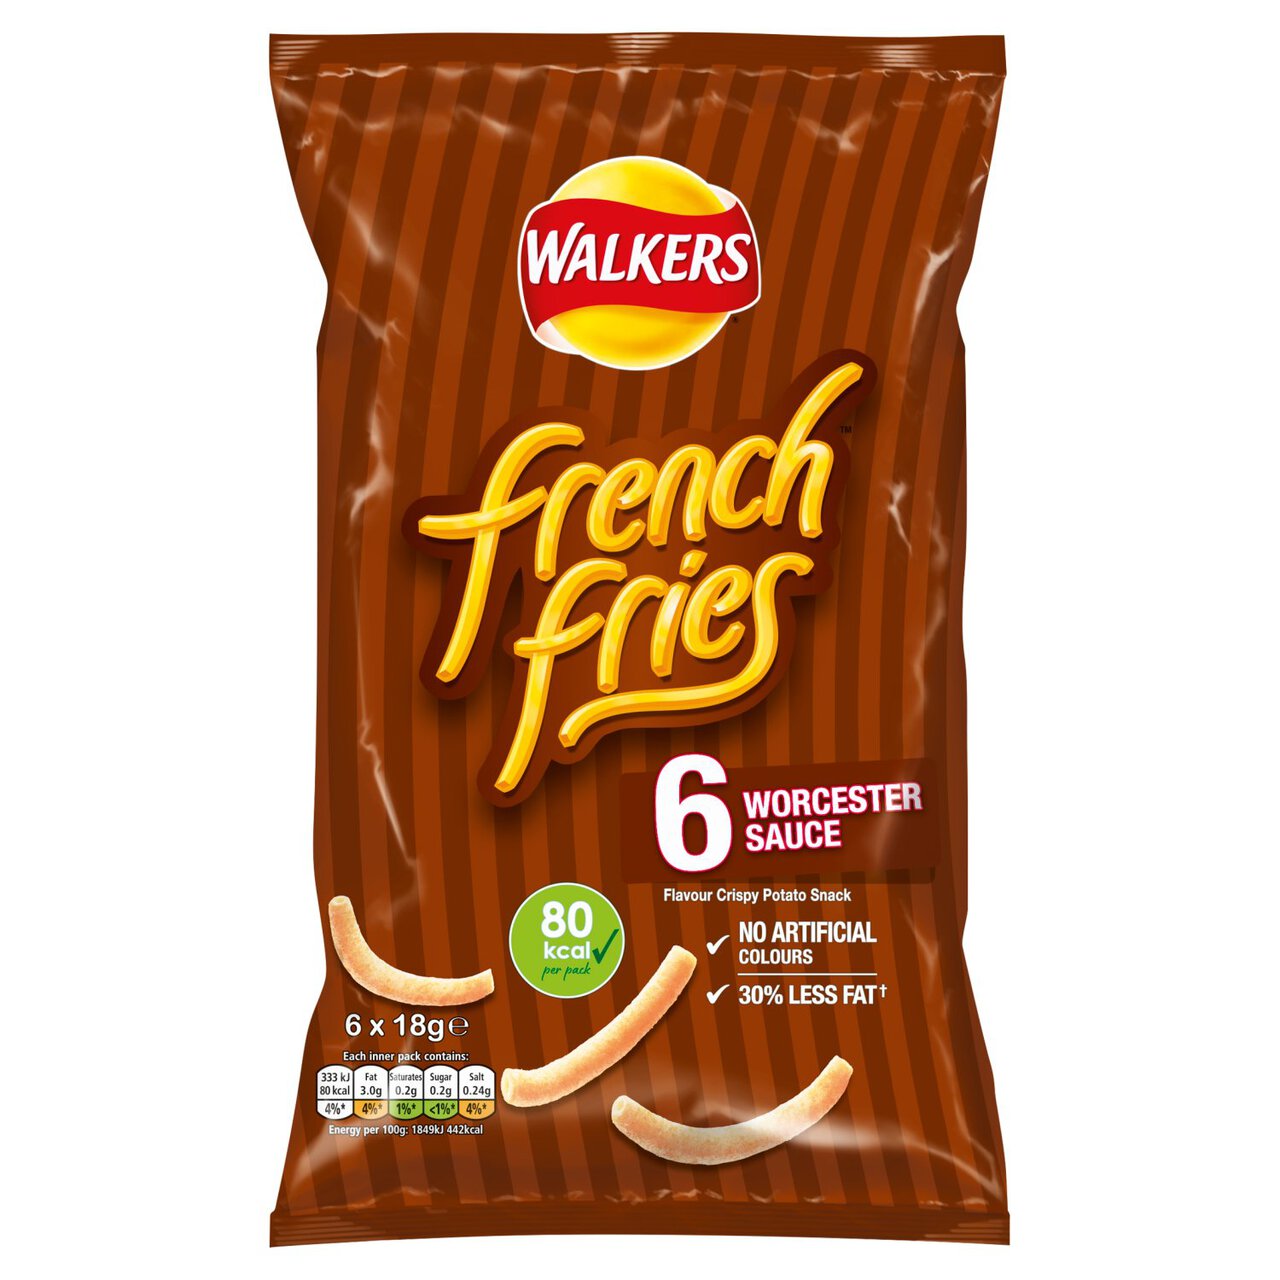 Walkers French Fries Worcester Sauce Snacks 6 per pack